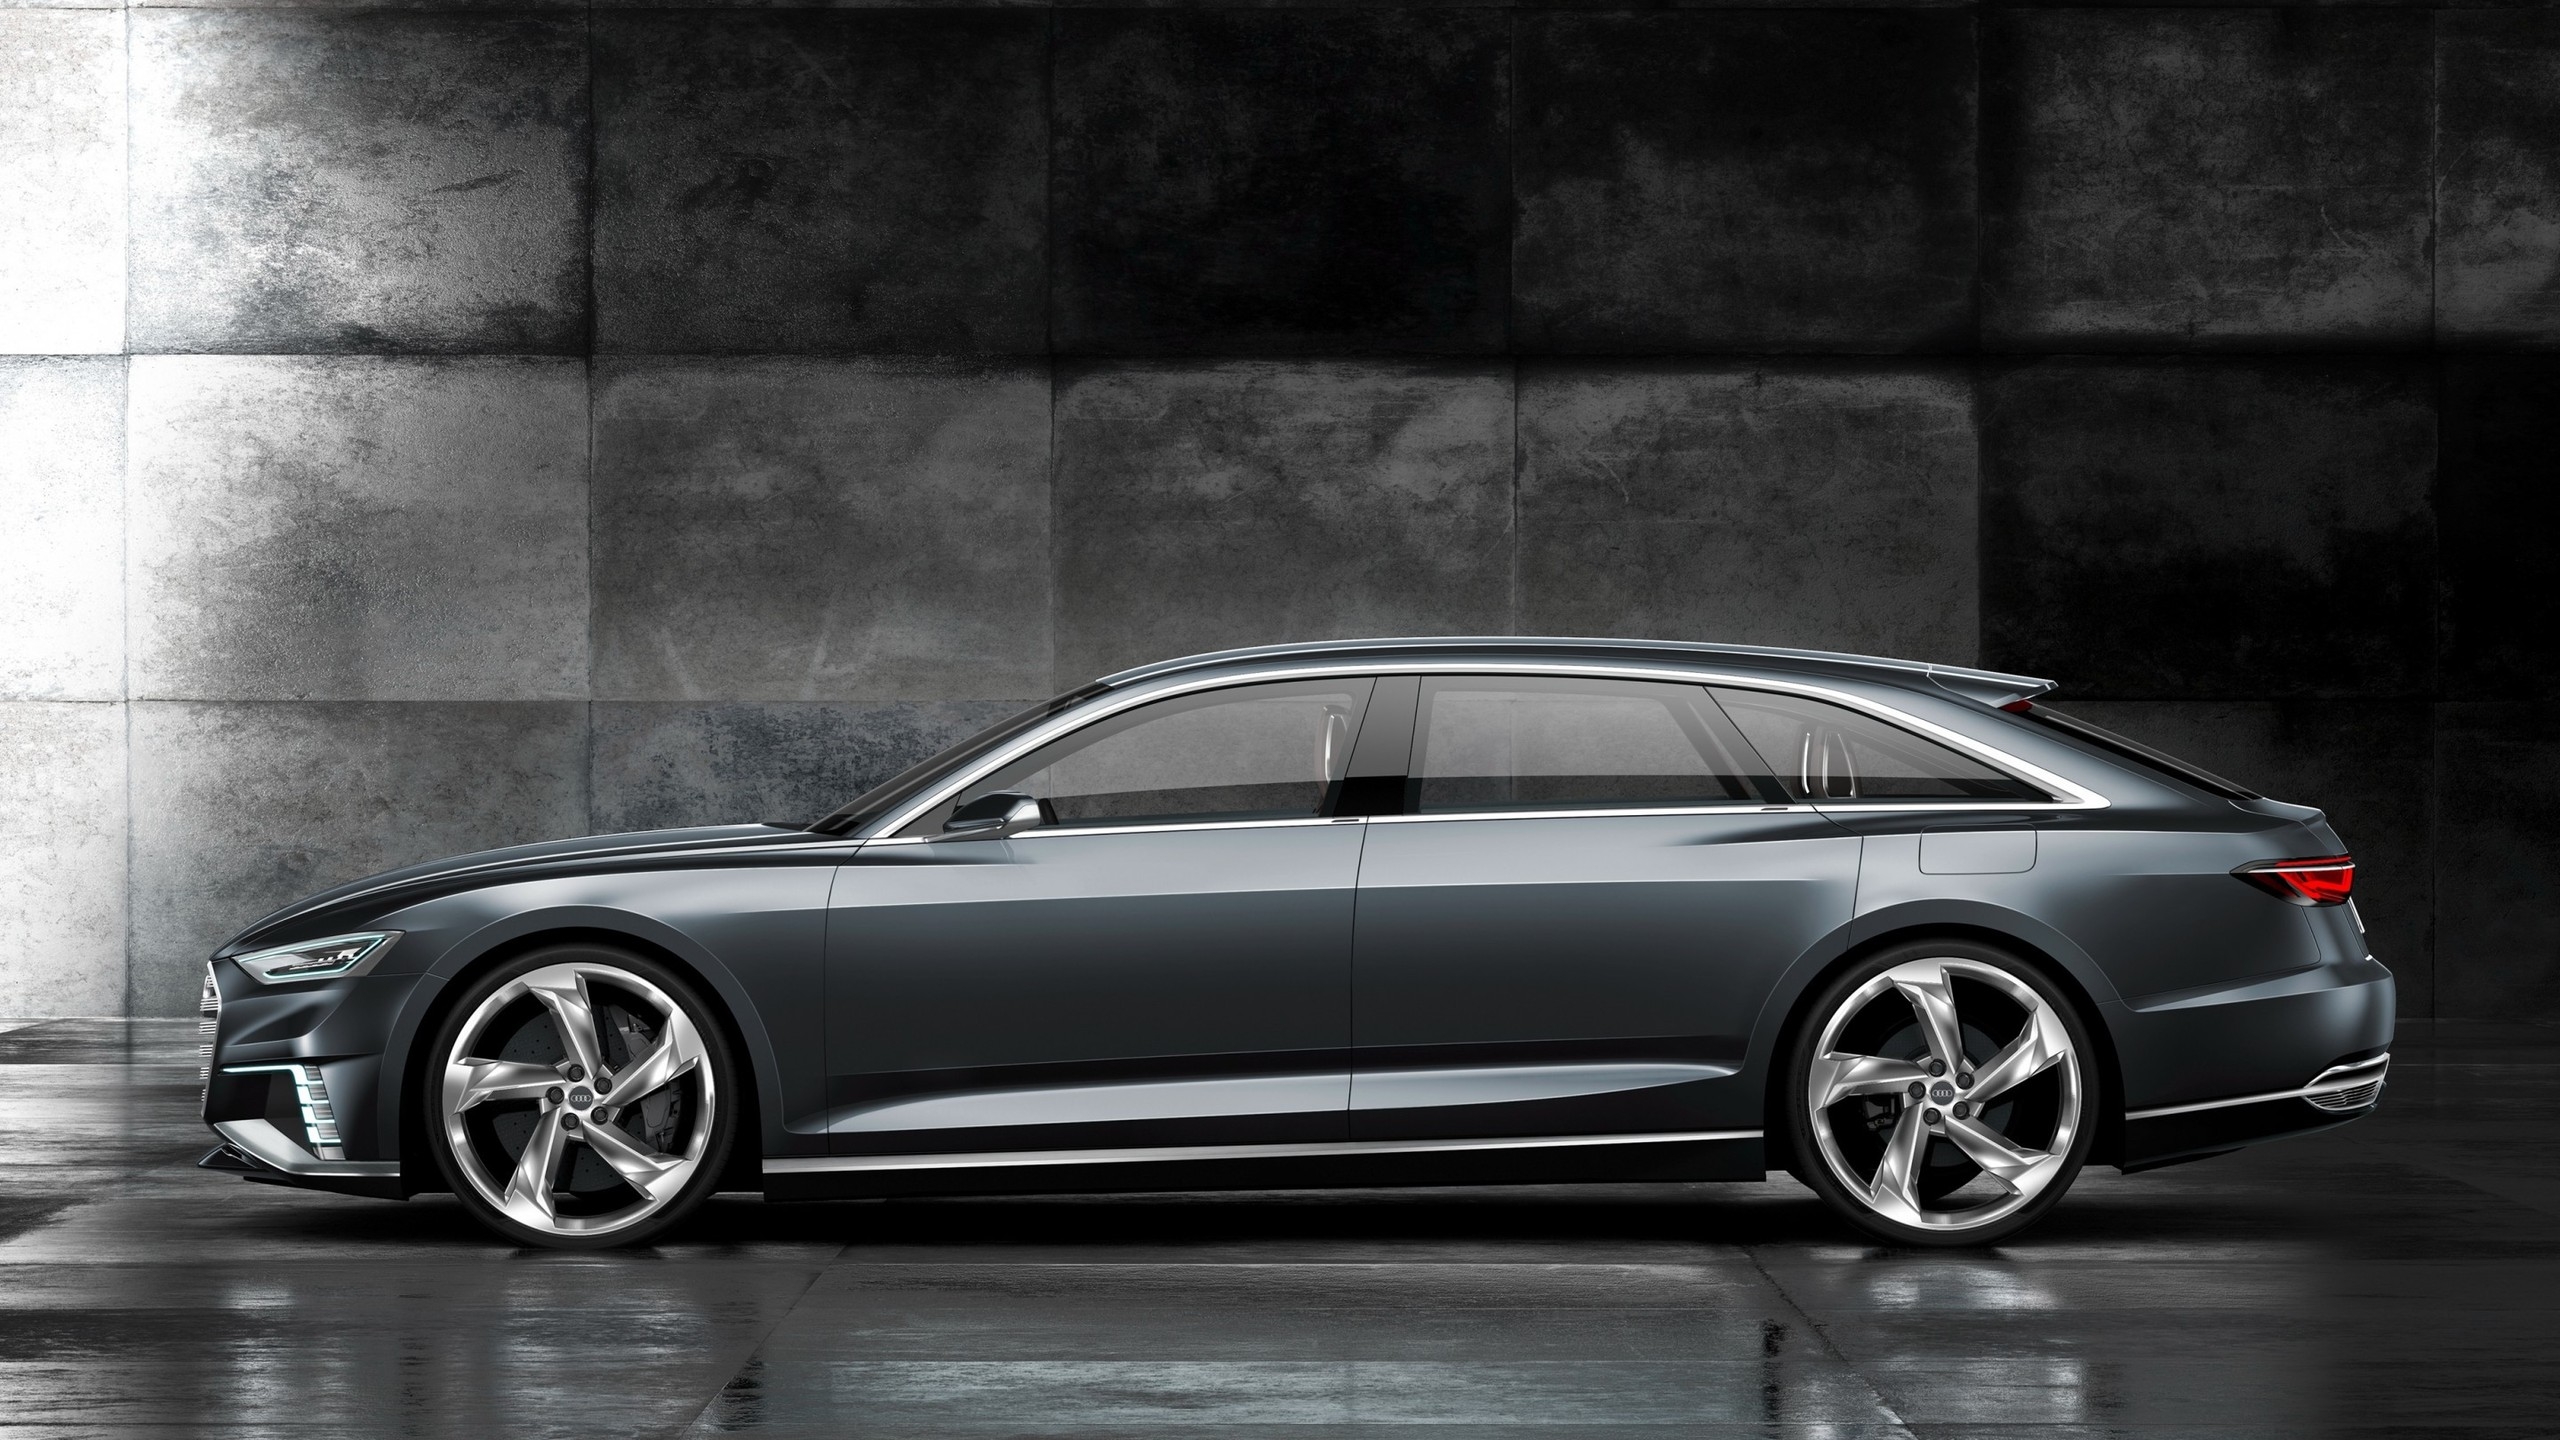 Audi Prologue Side View for 2560x1440 HDTV resolution